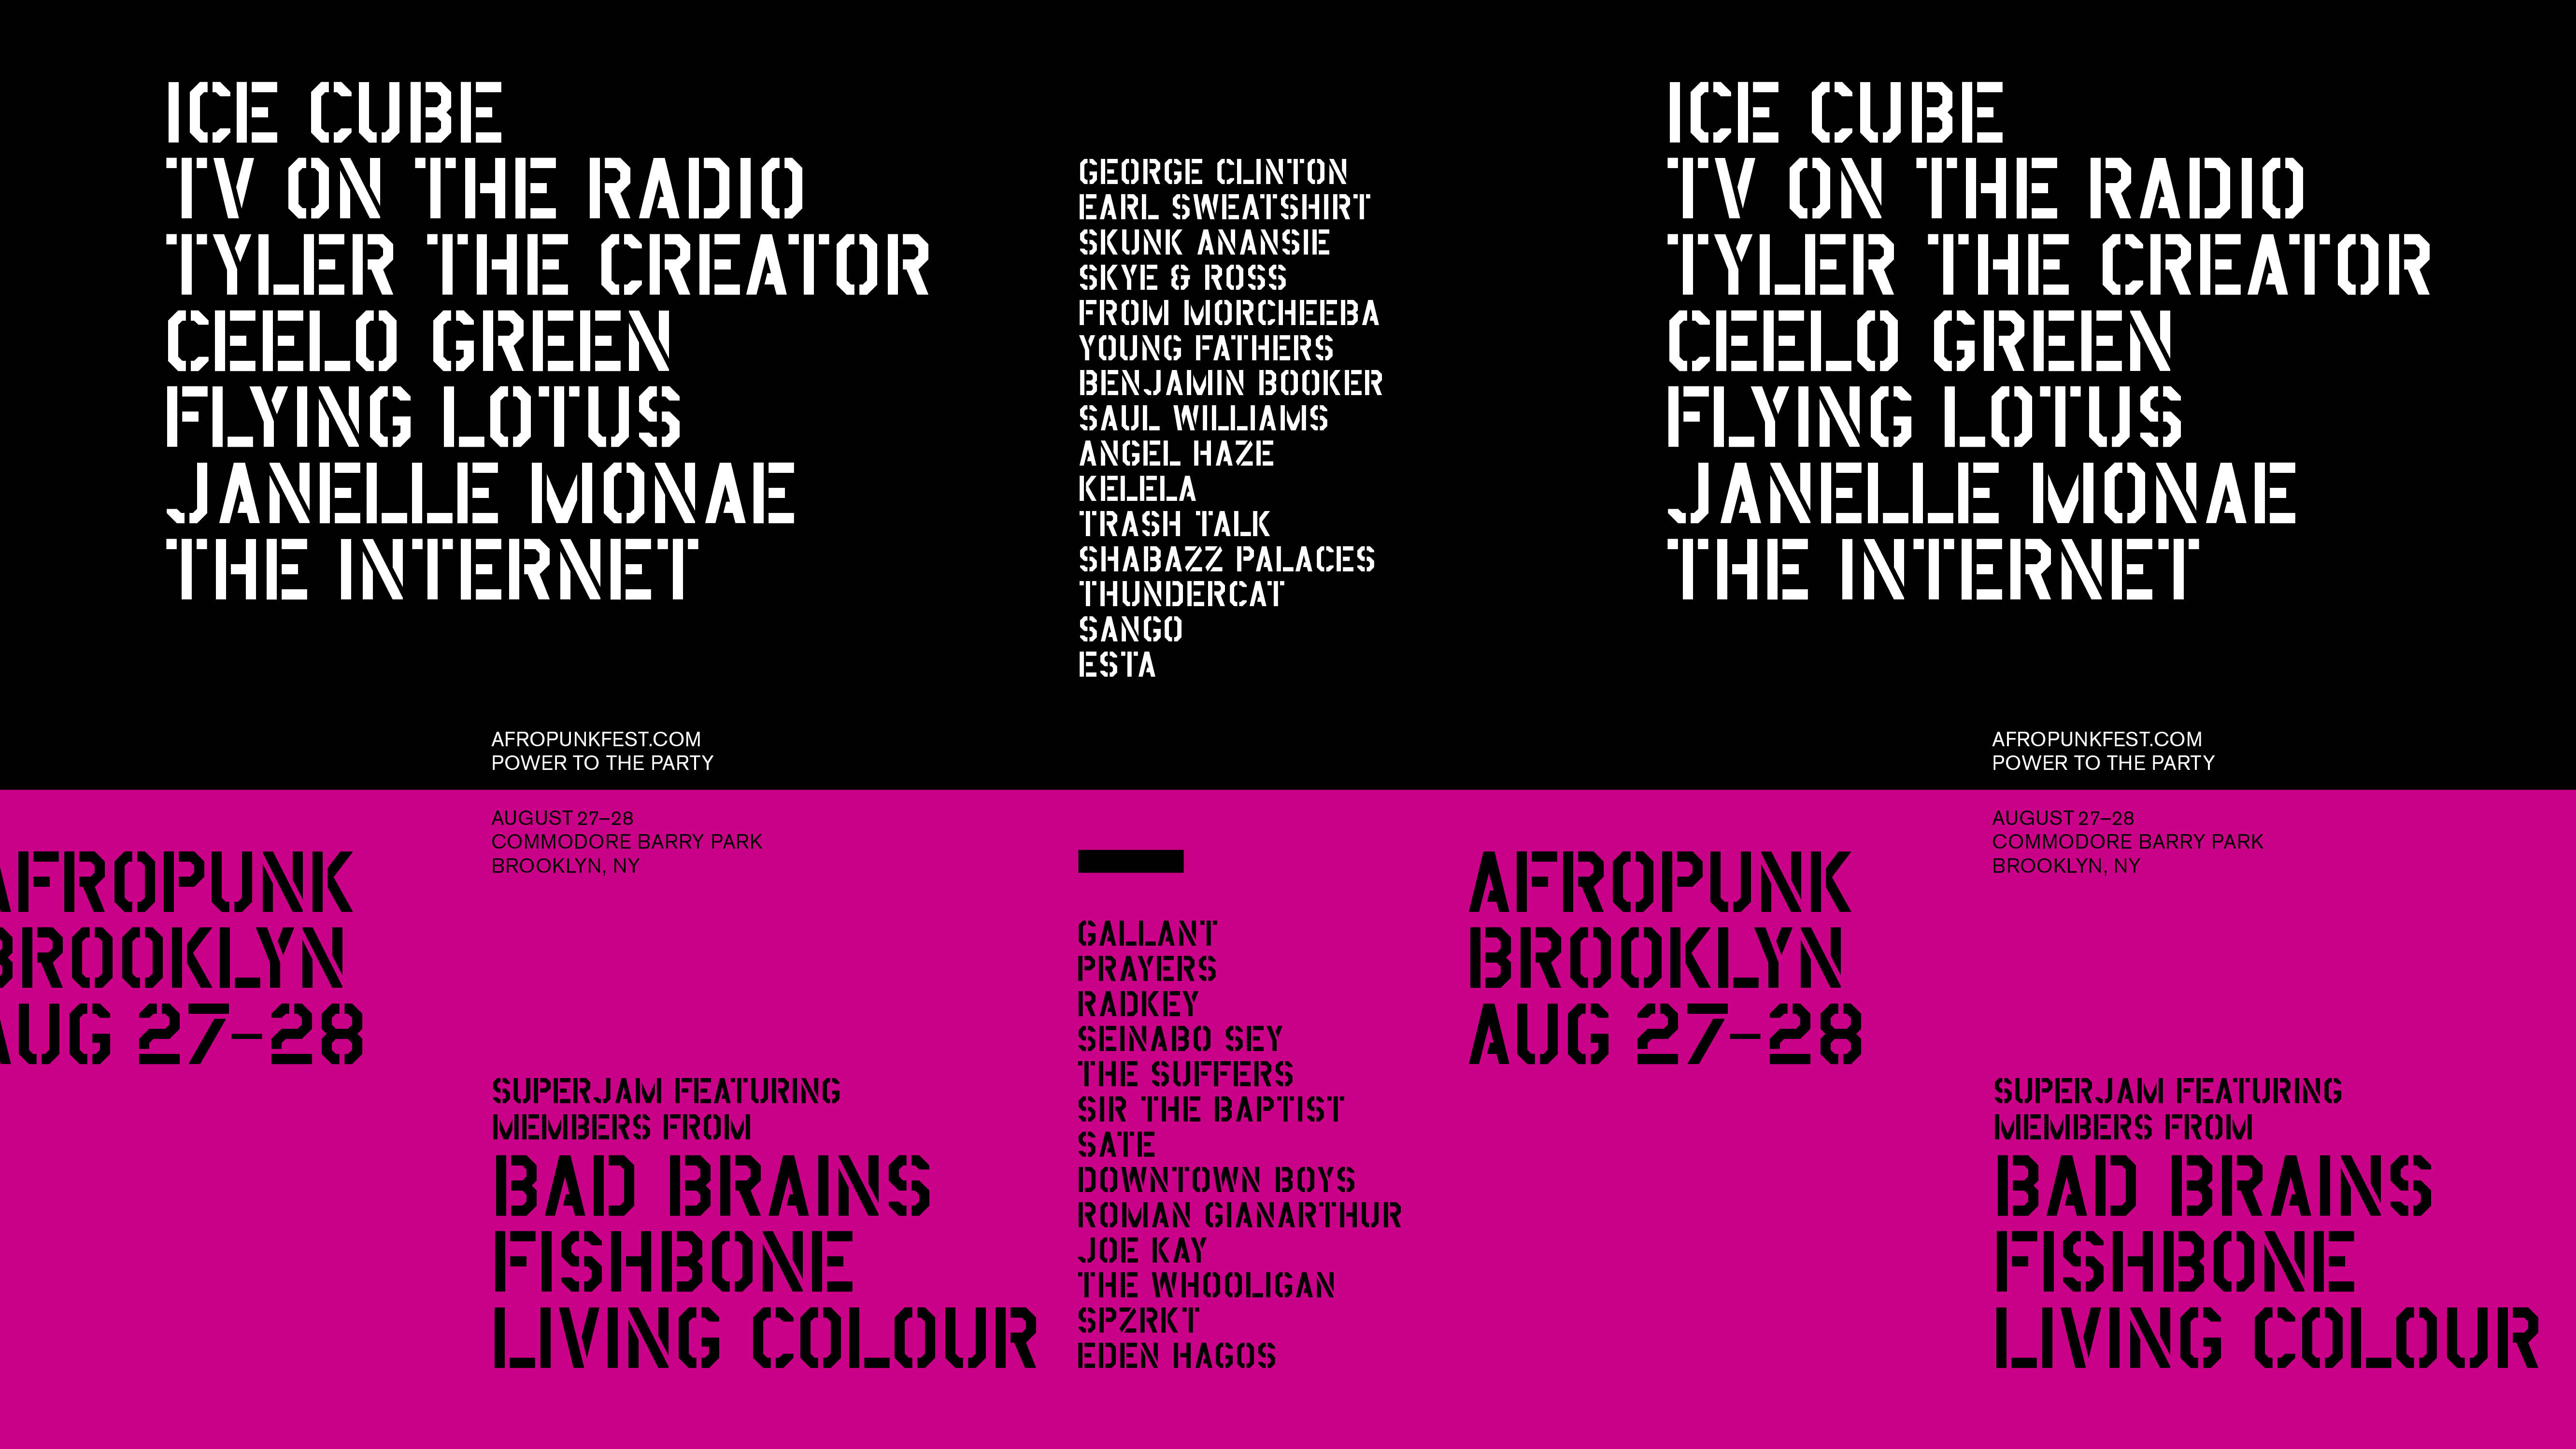 Afropunk Festival 2016 Lineup: Ice Cube, TV on the Radio, Tyler, the Creator, and More